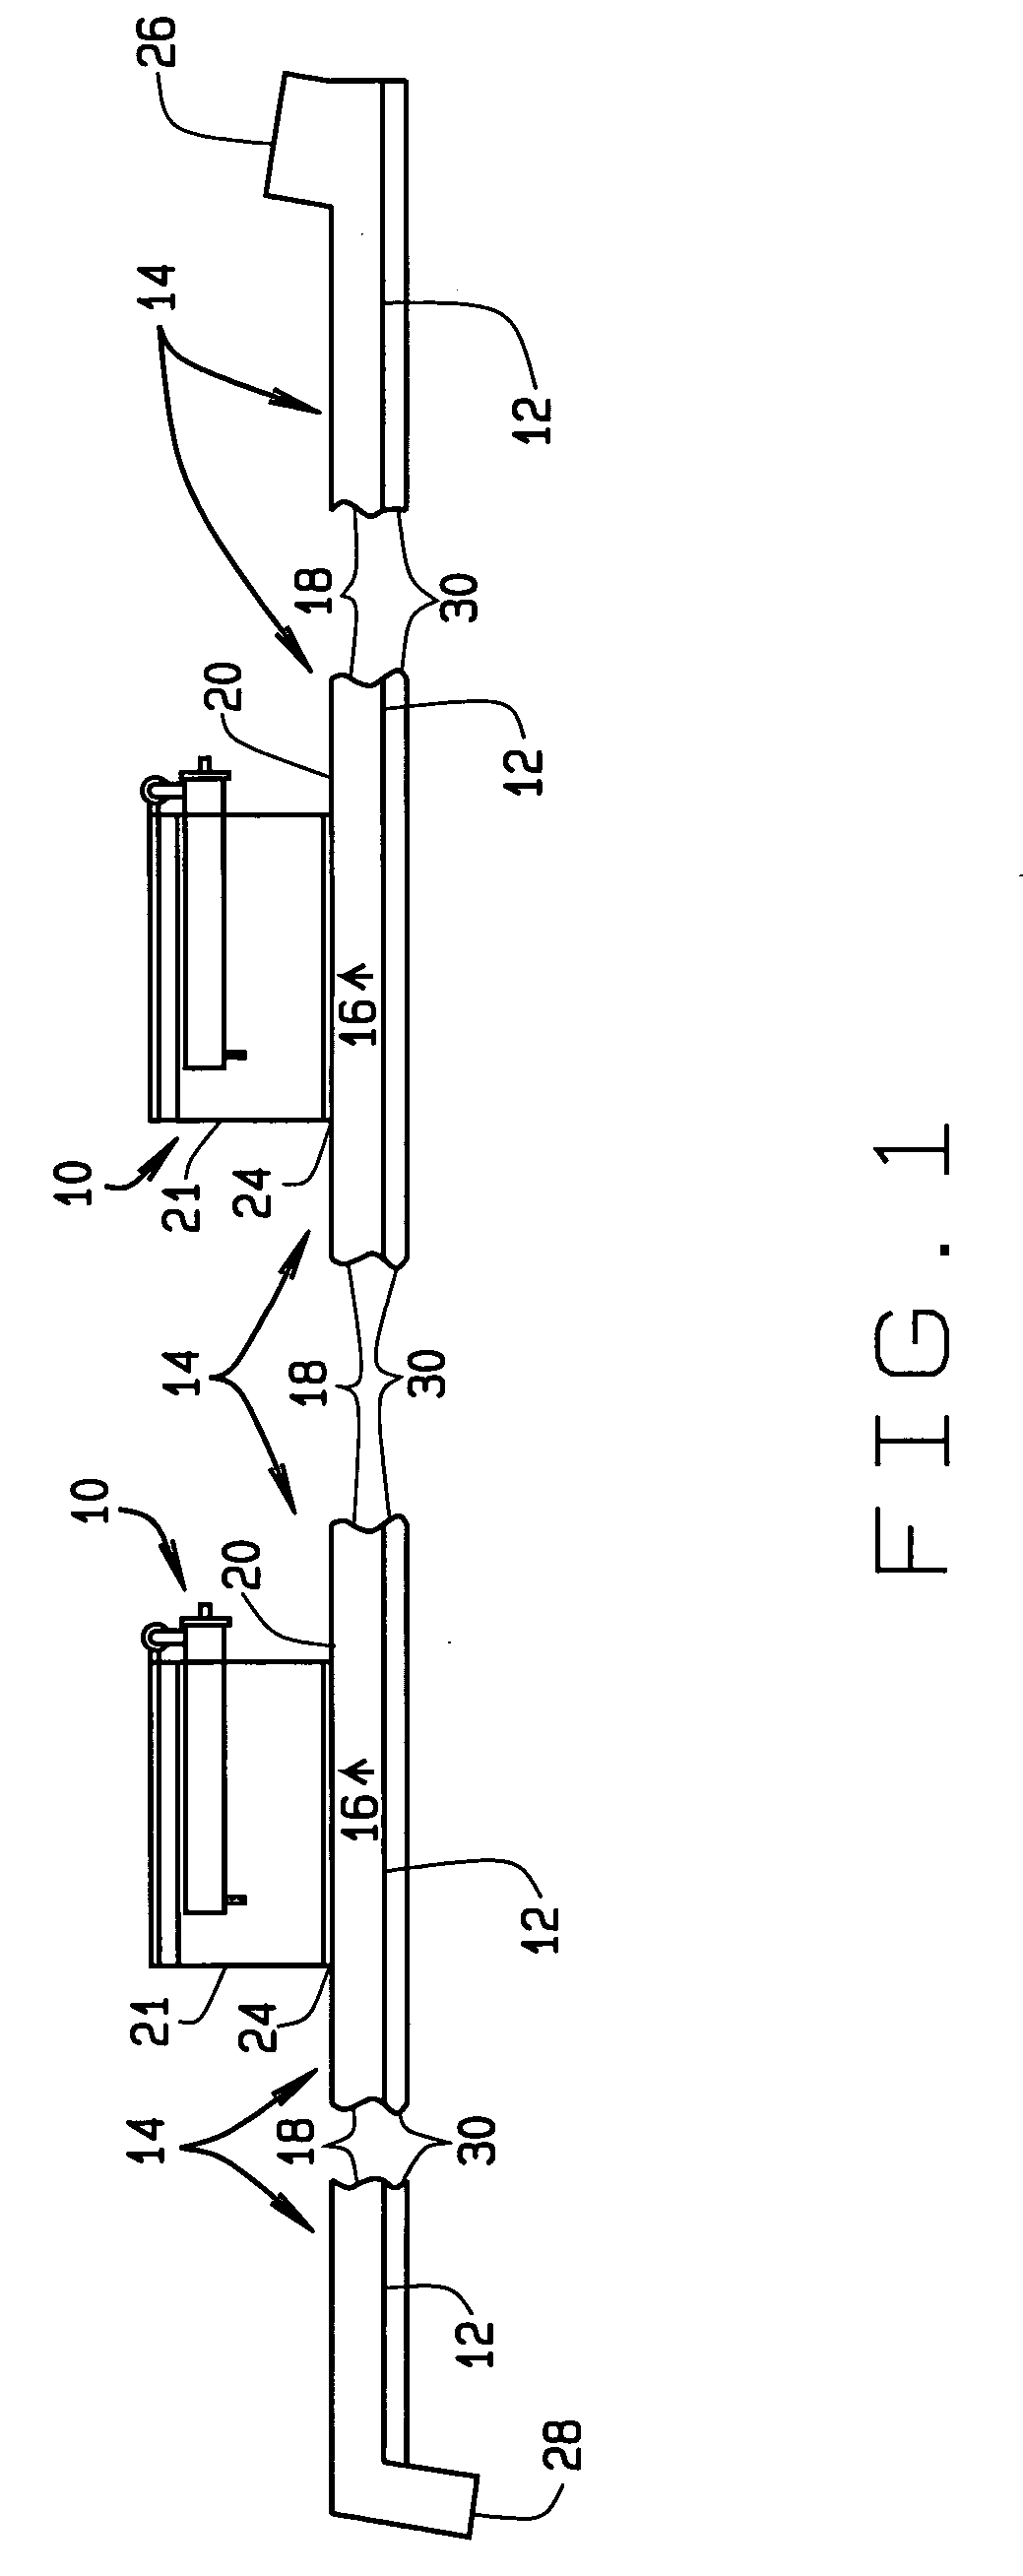 Methods and apparatus for air conveyor dust emission control